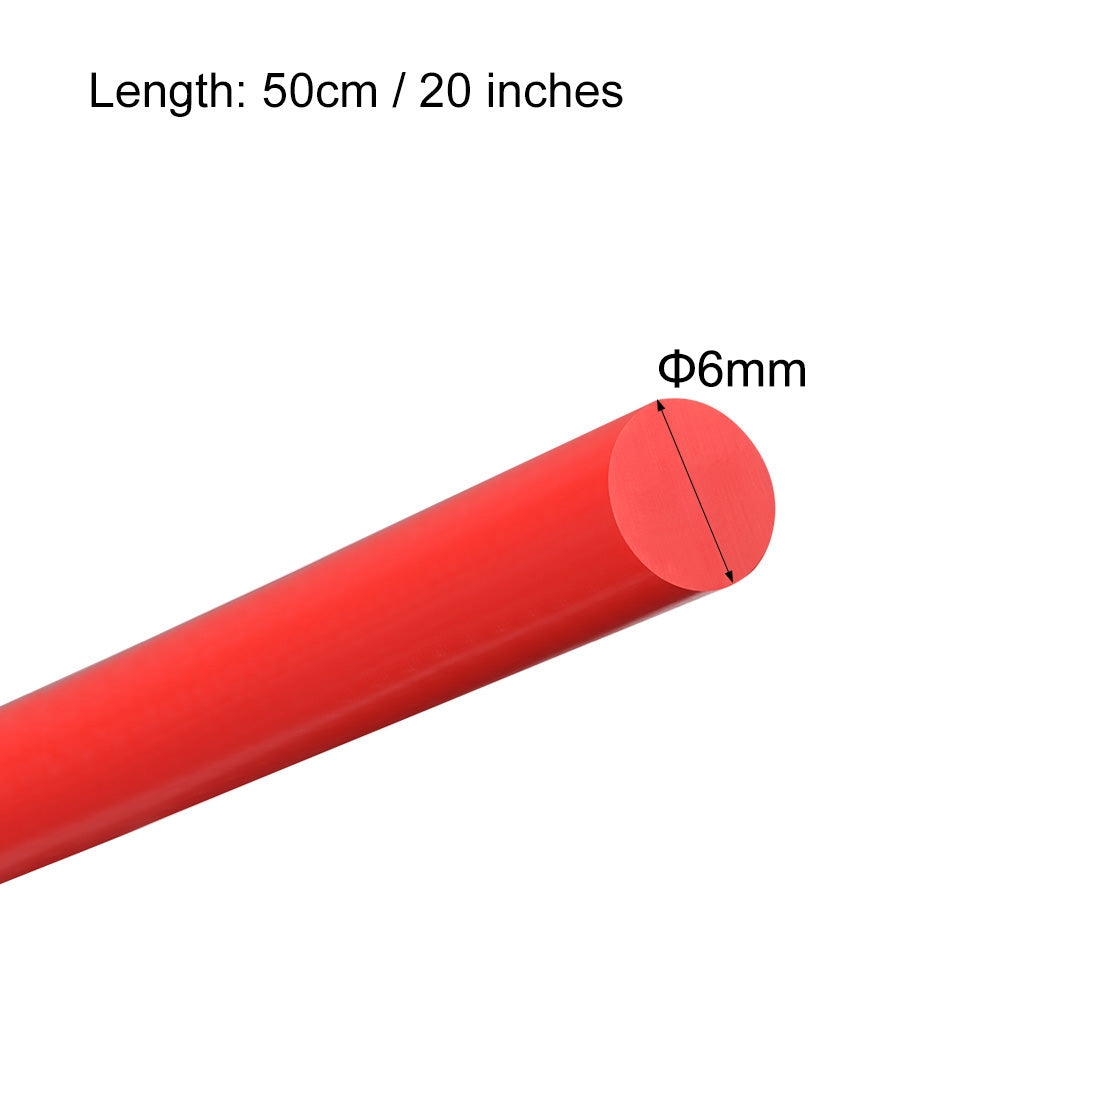 uxcell Uxcell Plastic Round Rod,6mm Dia 50cm Red Engineering Plastic Round Bar 3pcs